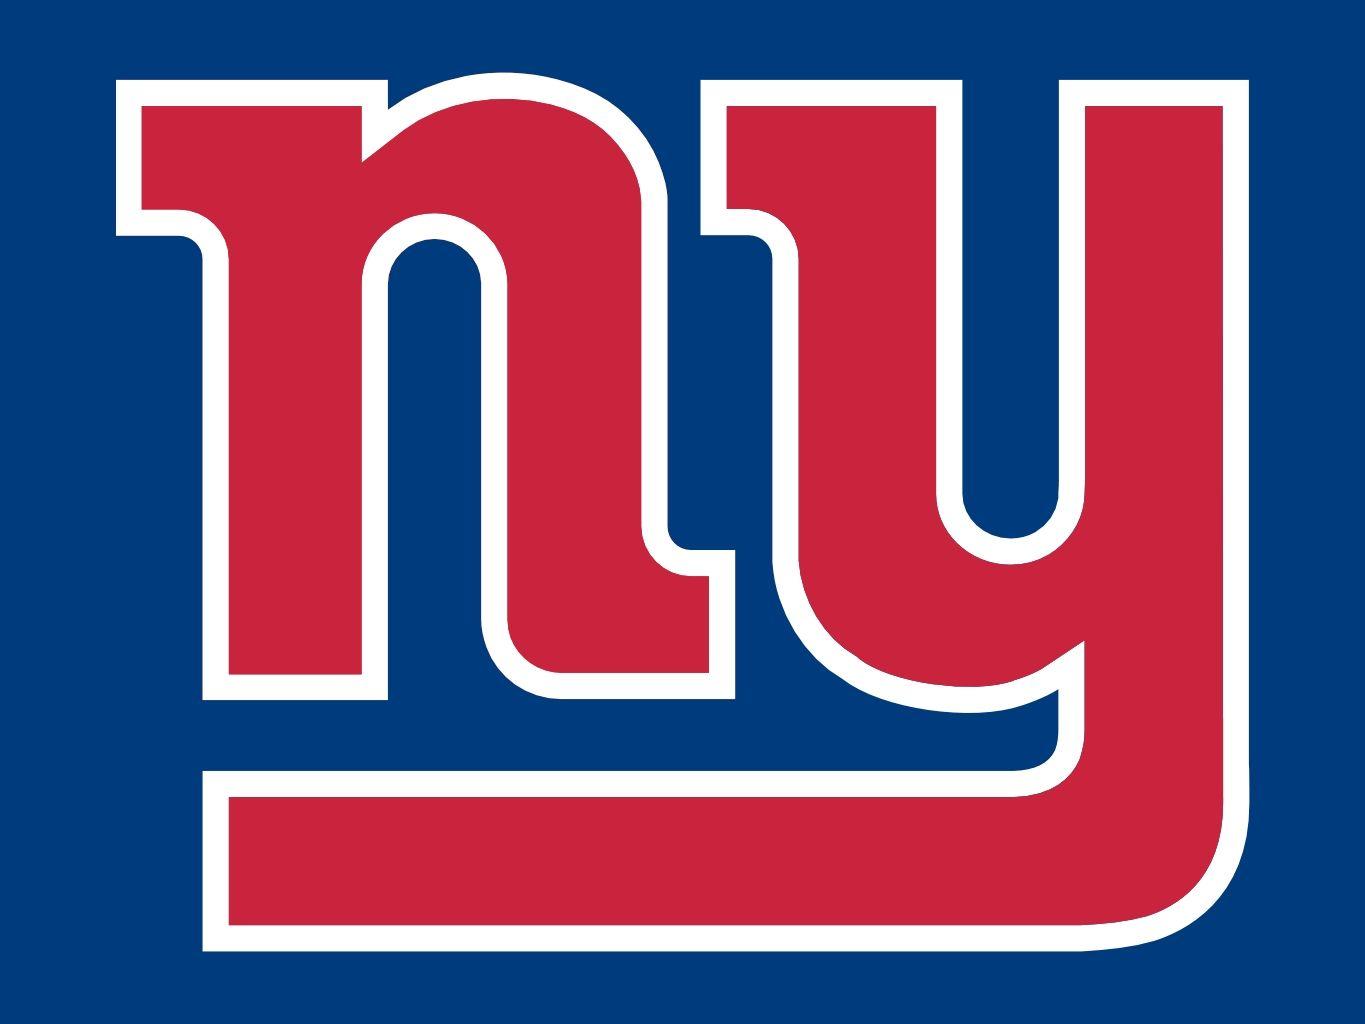 The New York Giants are a professional American football team